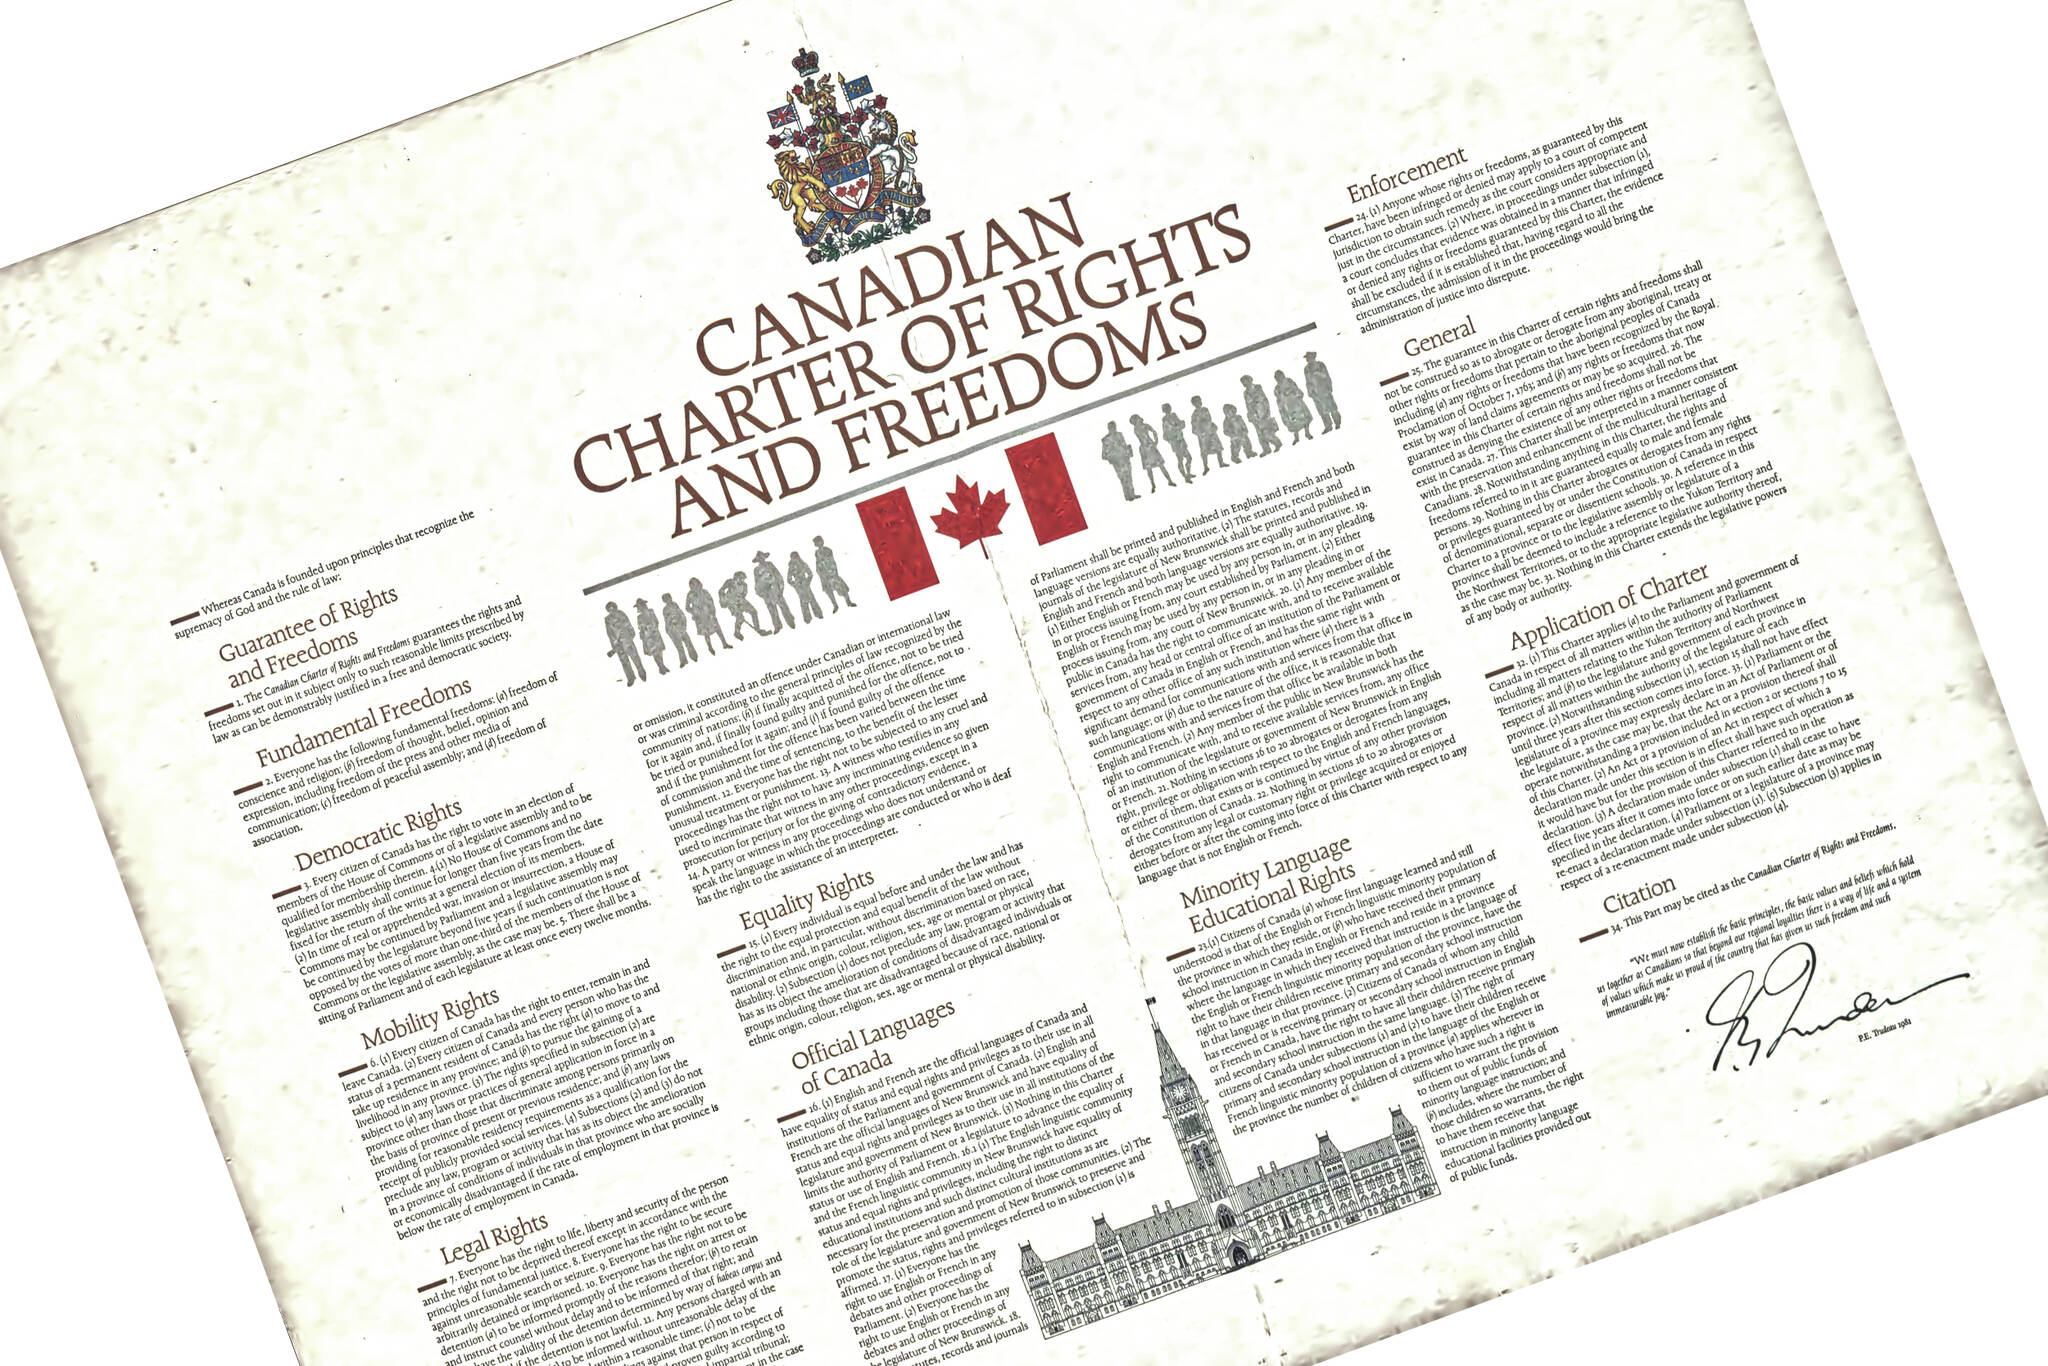 The Canadian Charter of Rights and Freedoms came into effect in April 1982 and is part of the Constitution. It supercedes previous legislation such as the Bill of Rights adopted in 1960. In the charter, what is the term used for legal fairness for all? (Canada.ca)